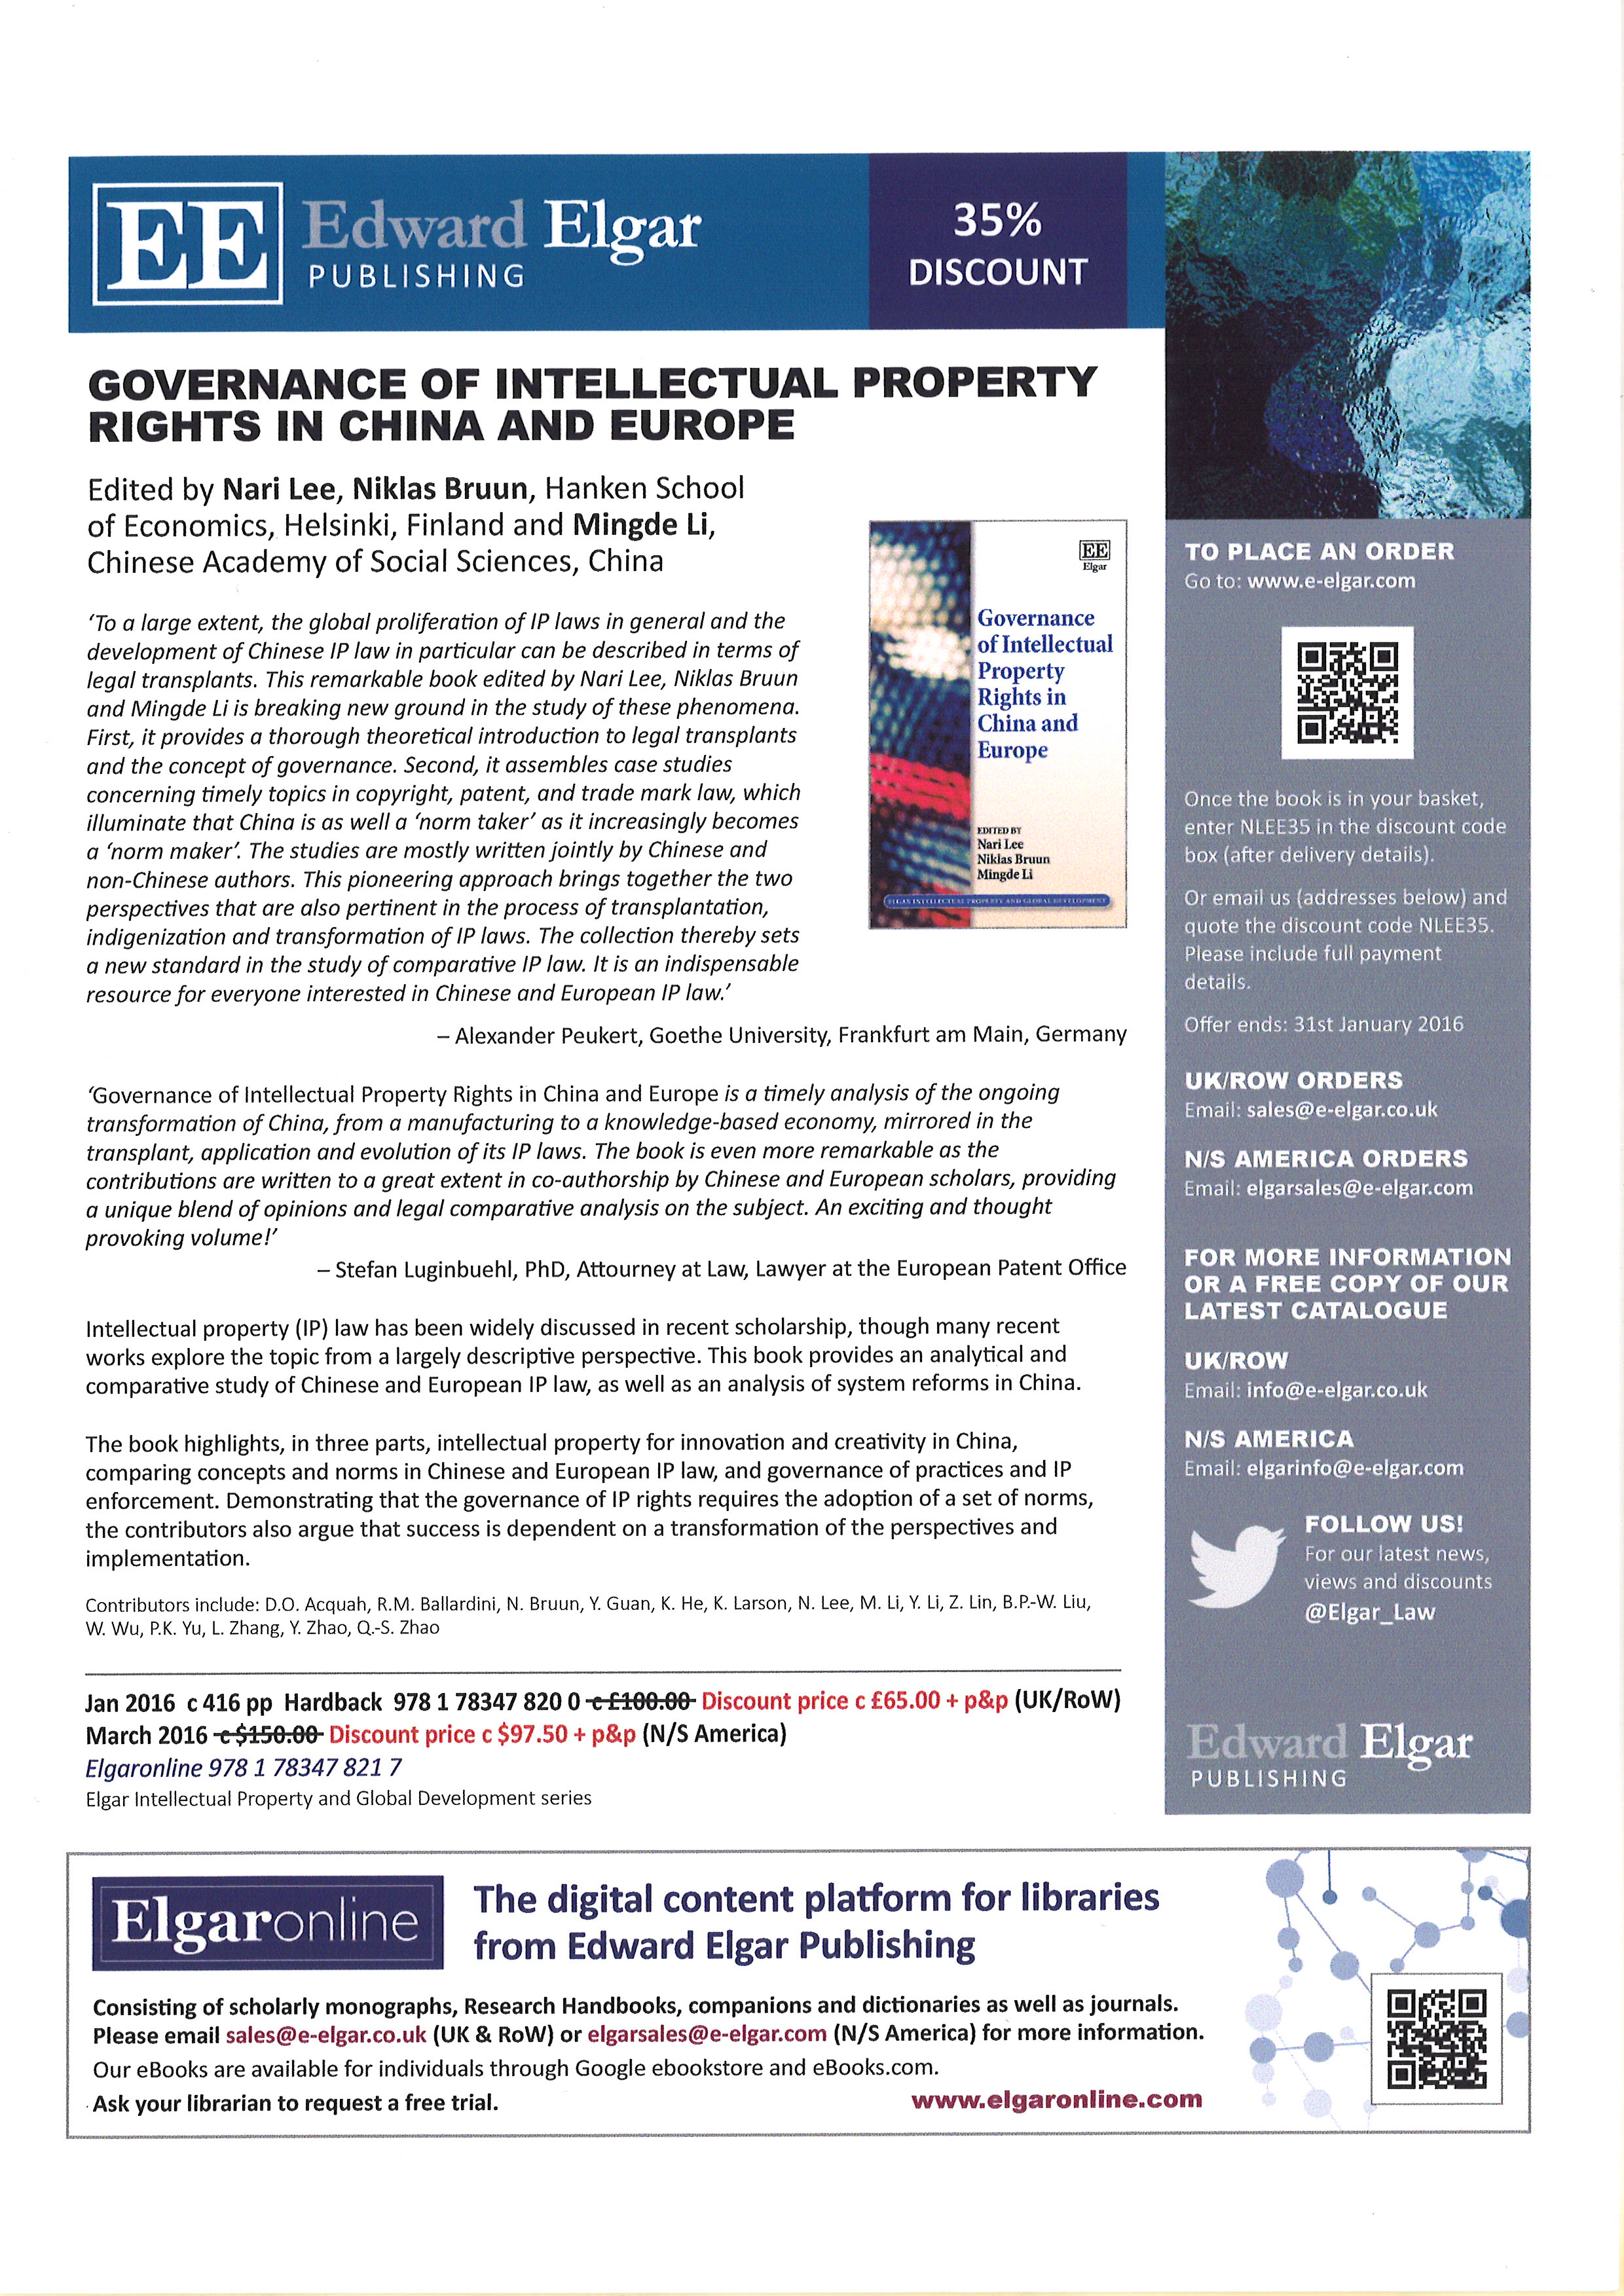 Governance of Intellectual Property Rights in China and Europe (flyer)